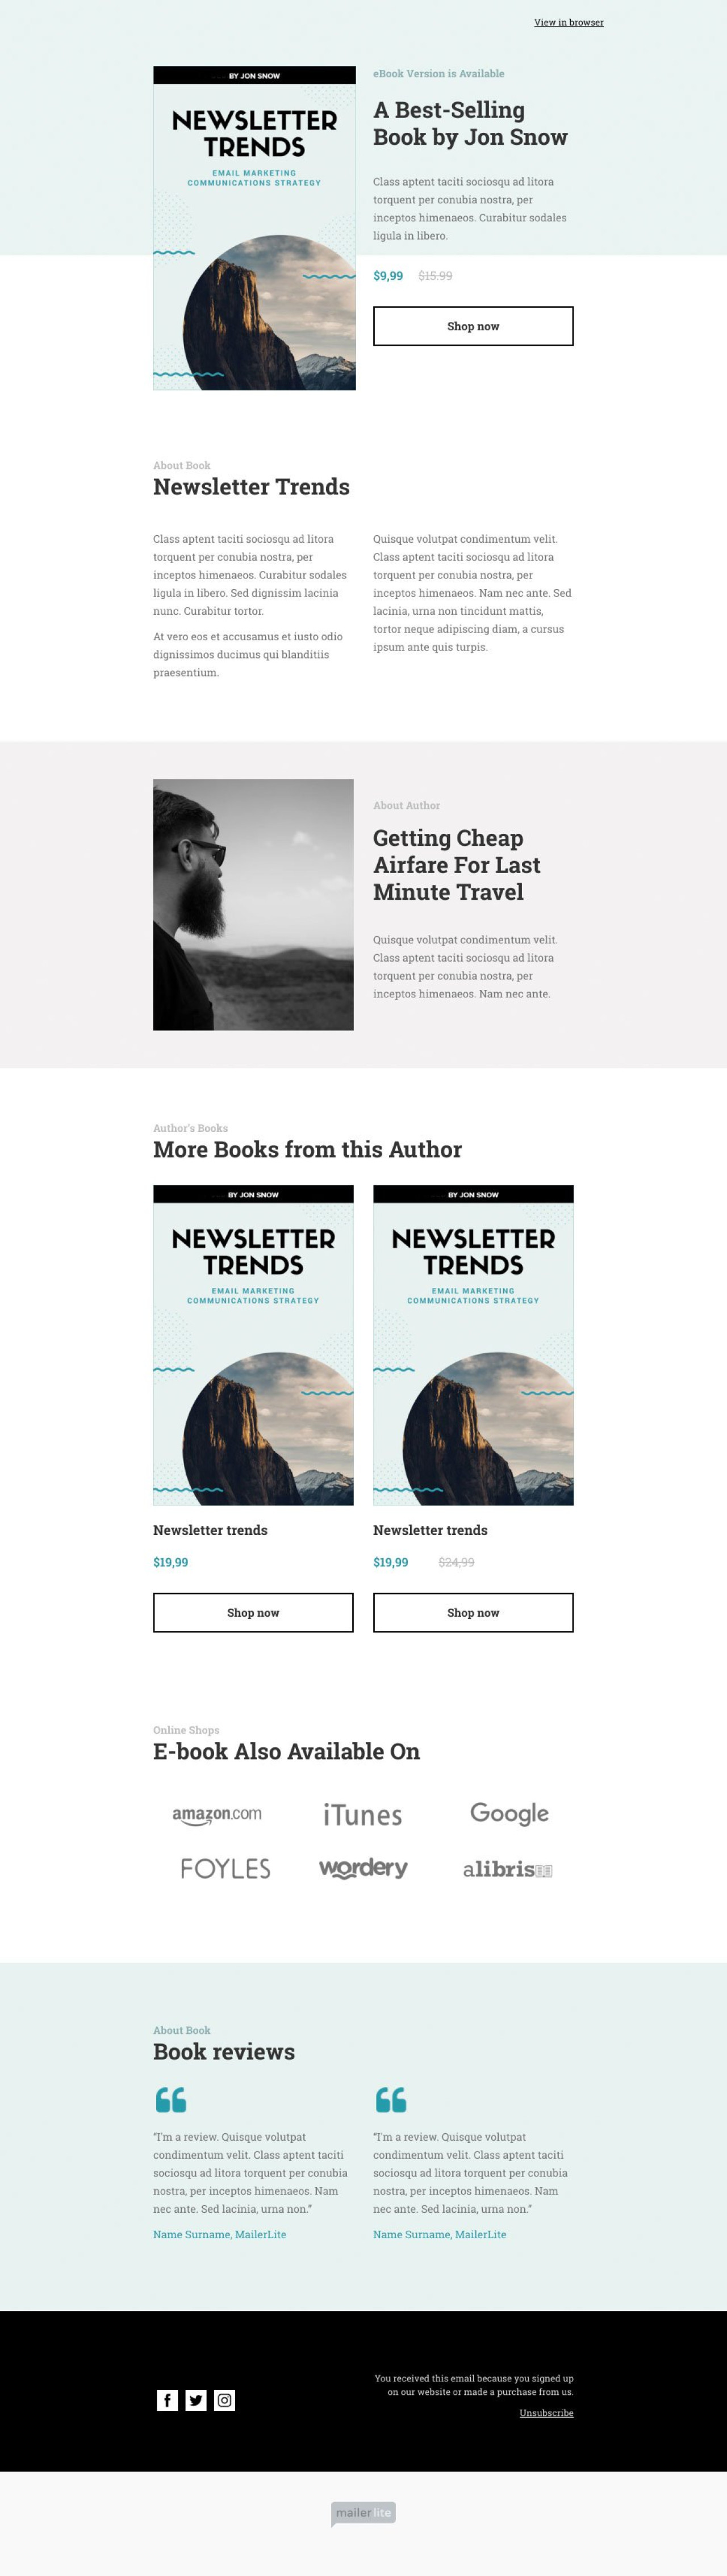 Featured Book & Author Info example - Made with MailerLite